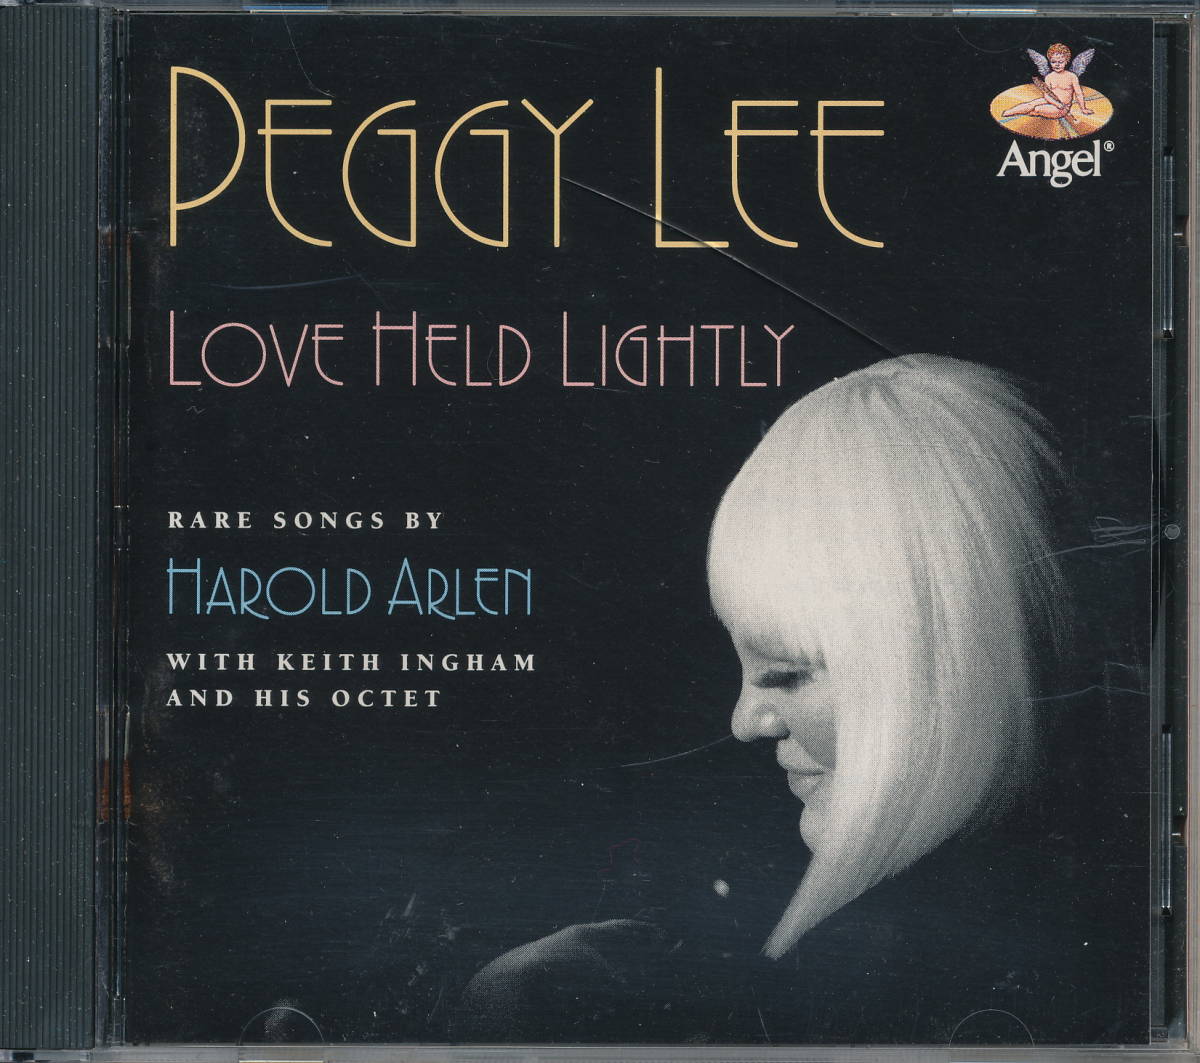 pegi-* Lee PEGGY LEE[LOVE HELD LIGHTLY - Rare Songs by Harold Arlen] with Keith Ingham and His Octet Keith * in chewing gum 